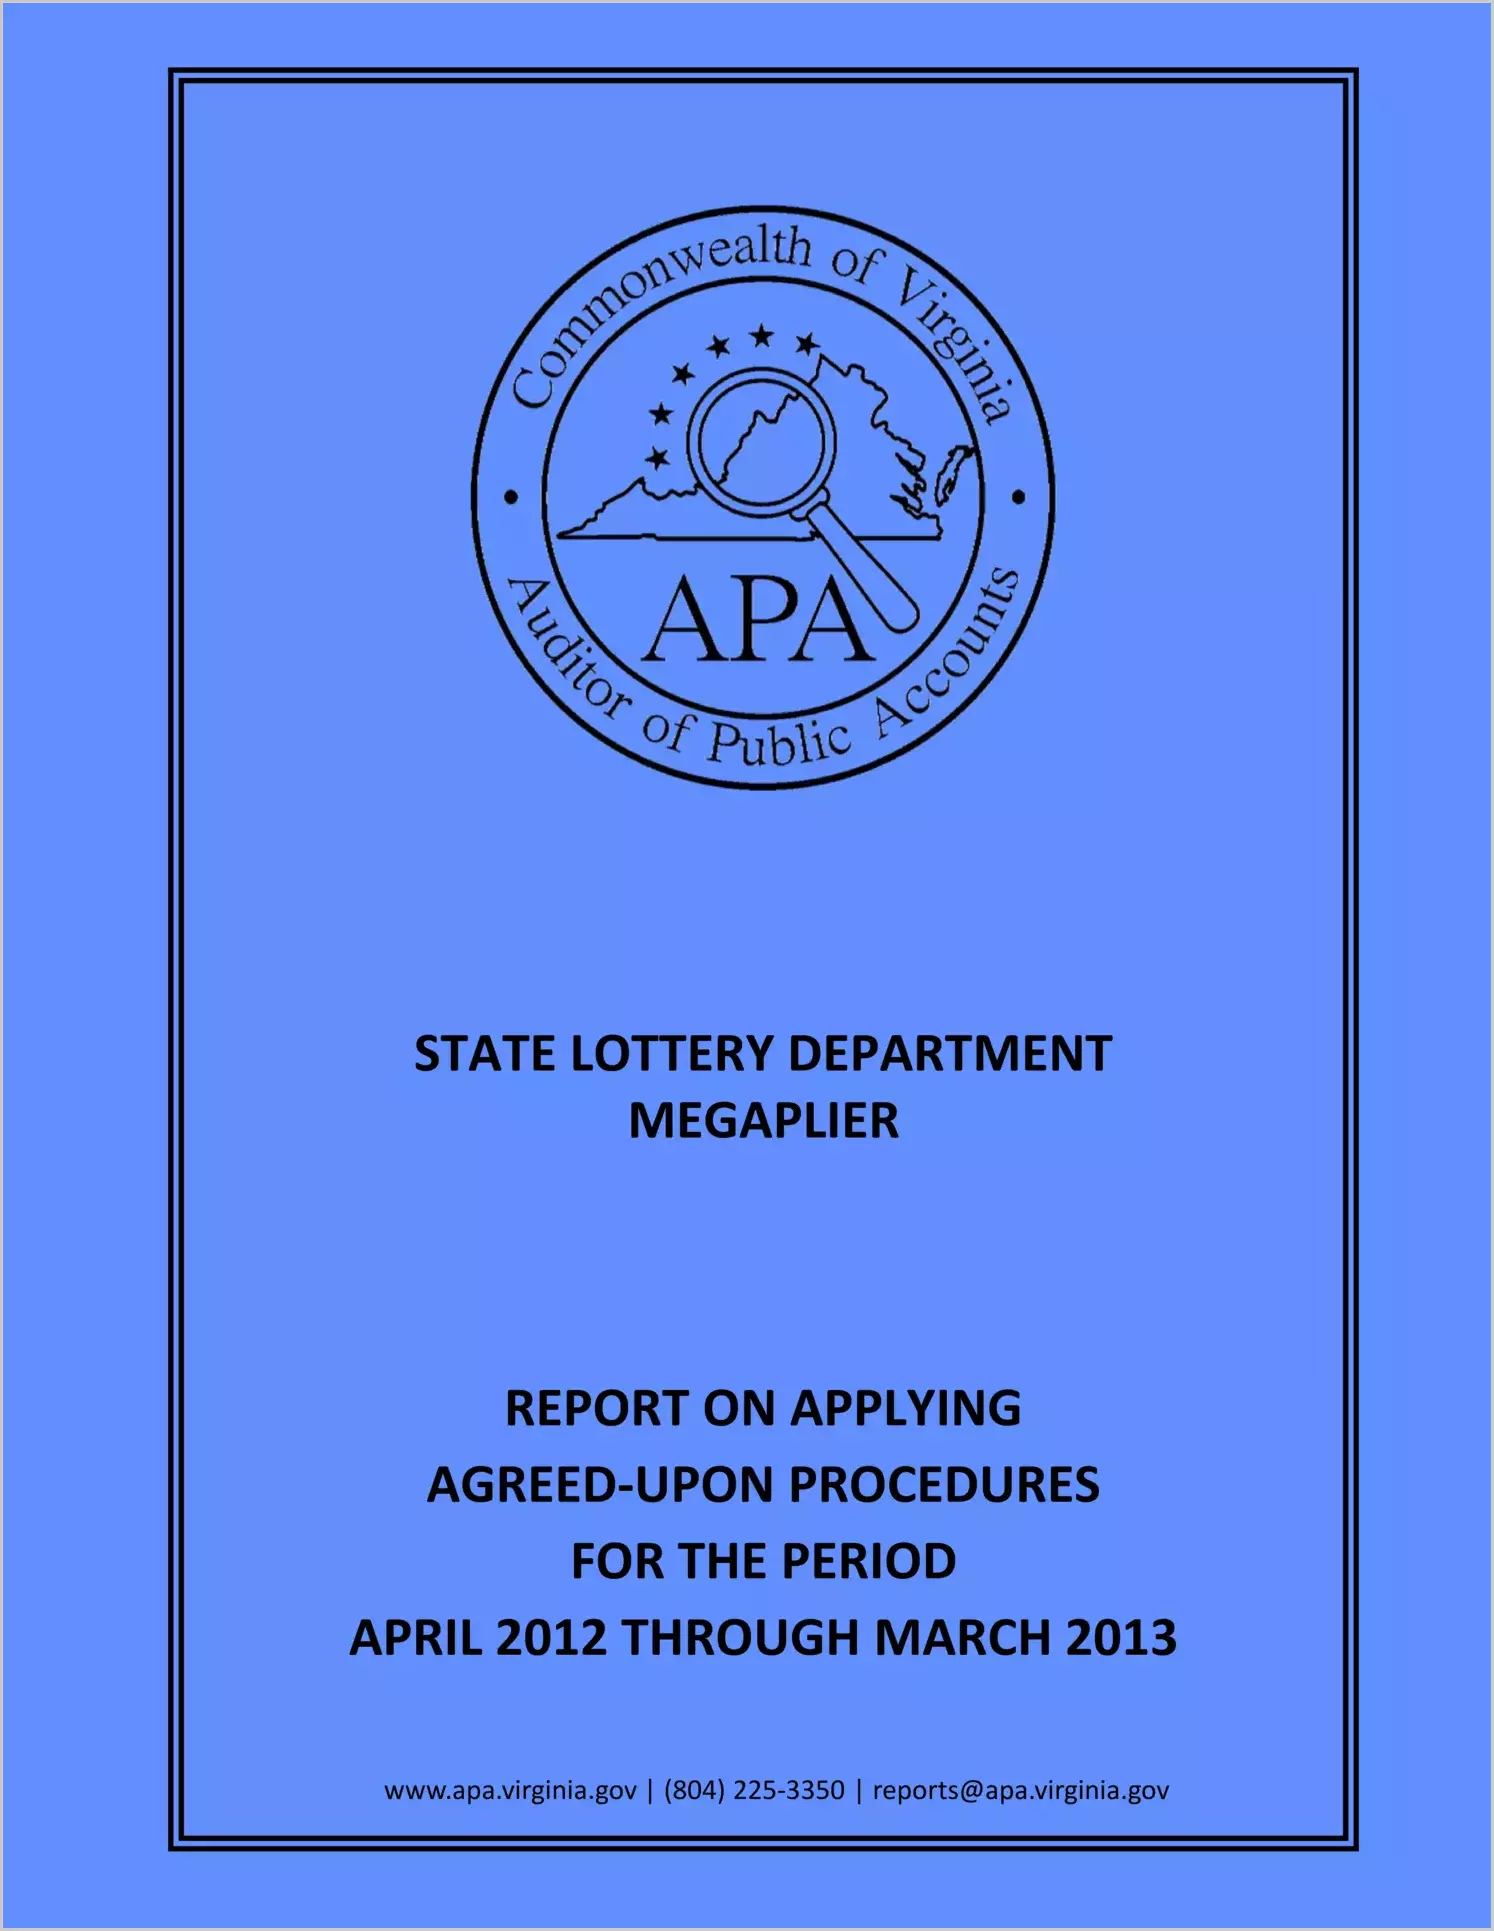 State Lottery Department Megaplier report on Applying Agreed-Upon Procedures for the period Arpil, 2012 through March, 2013